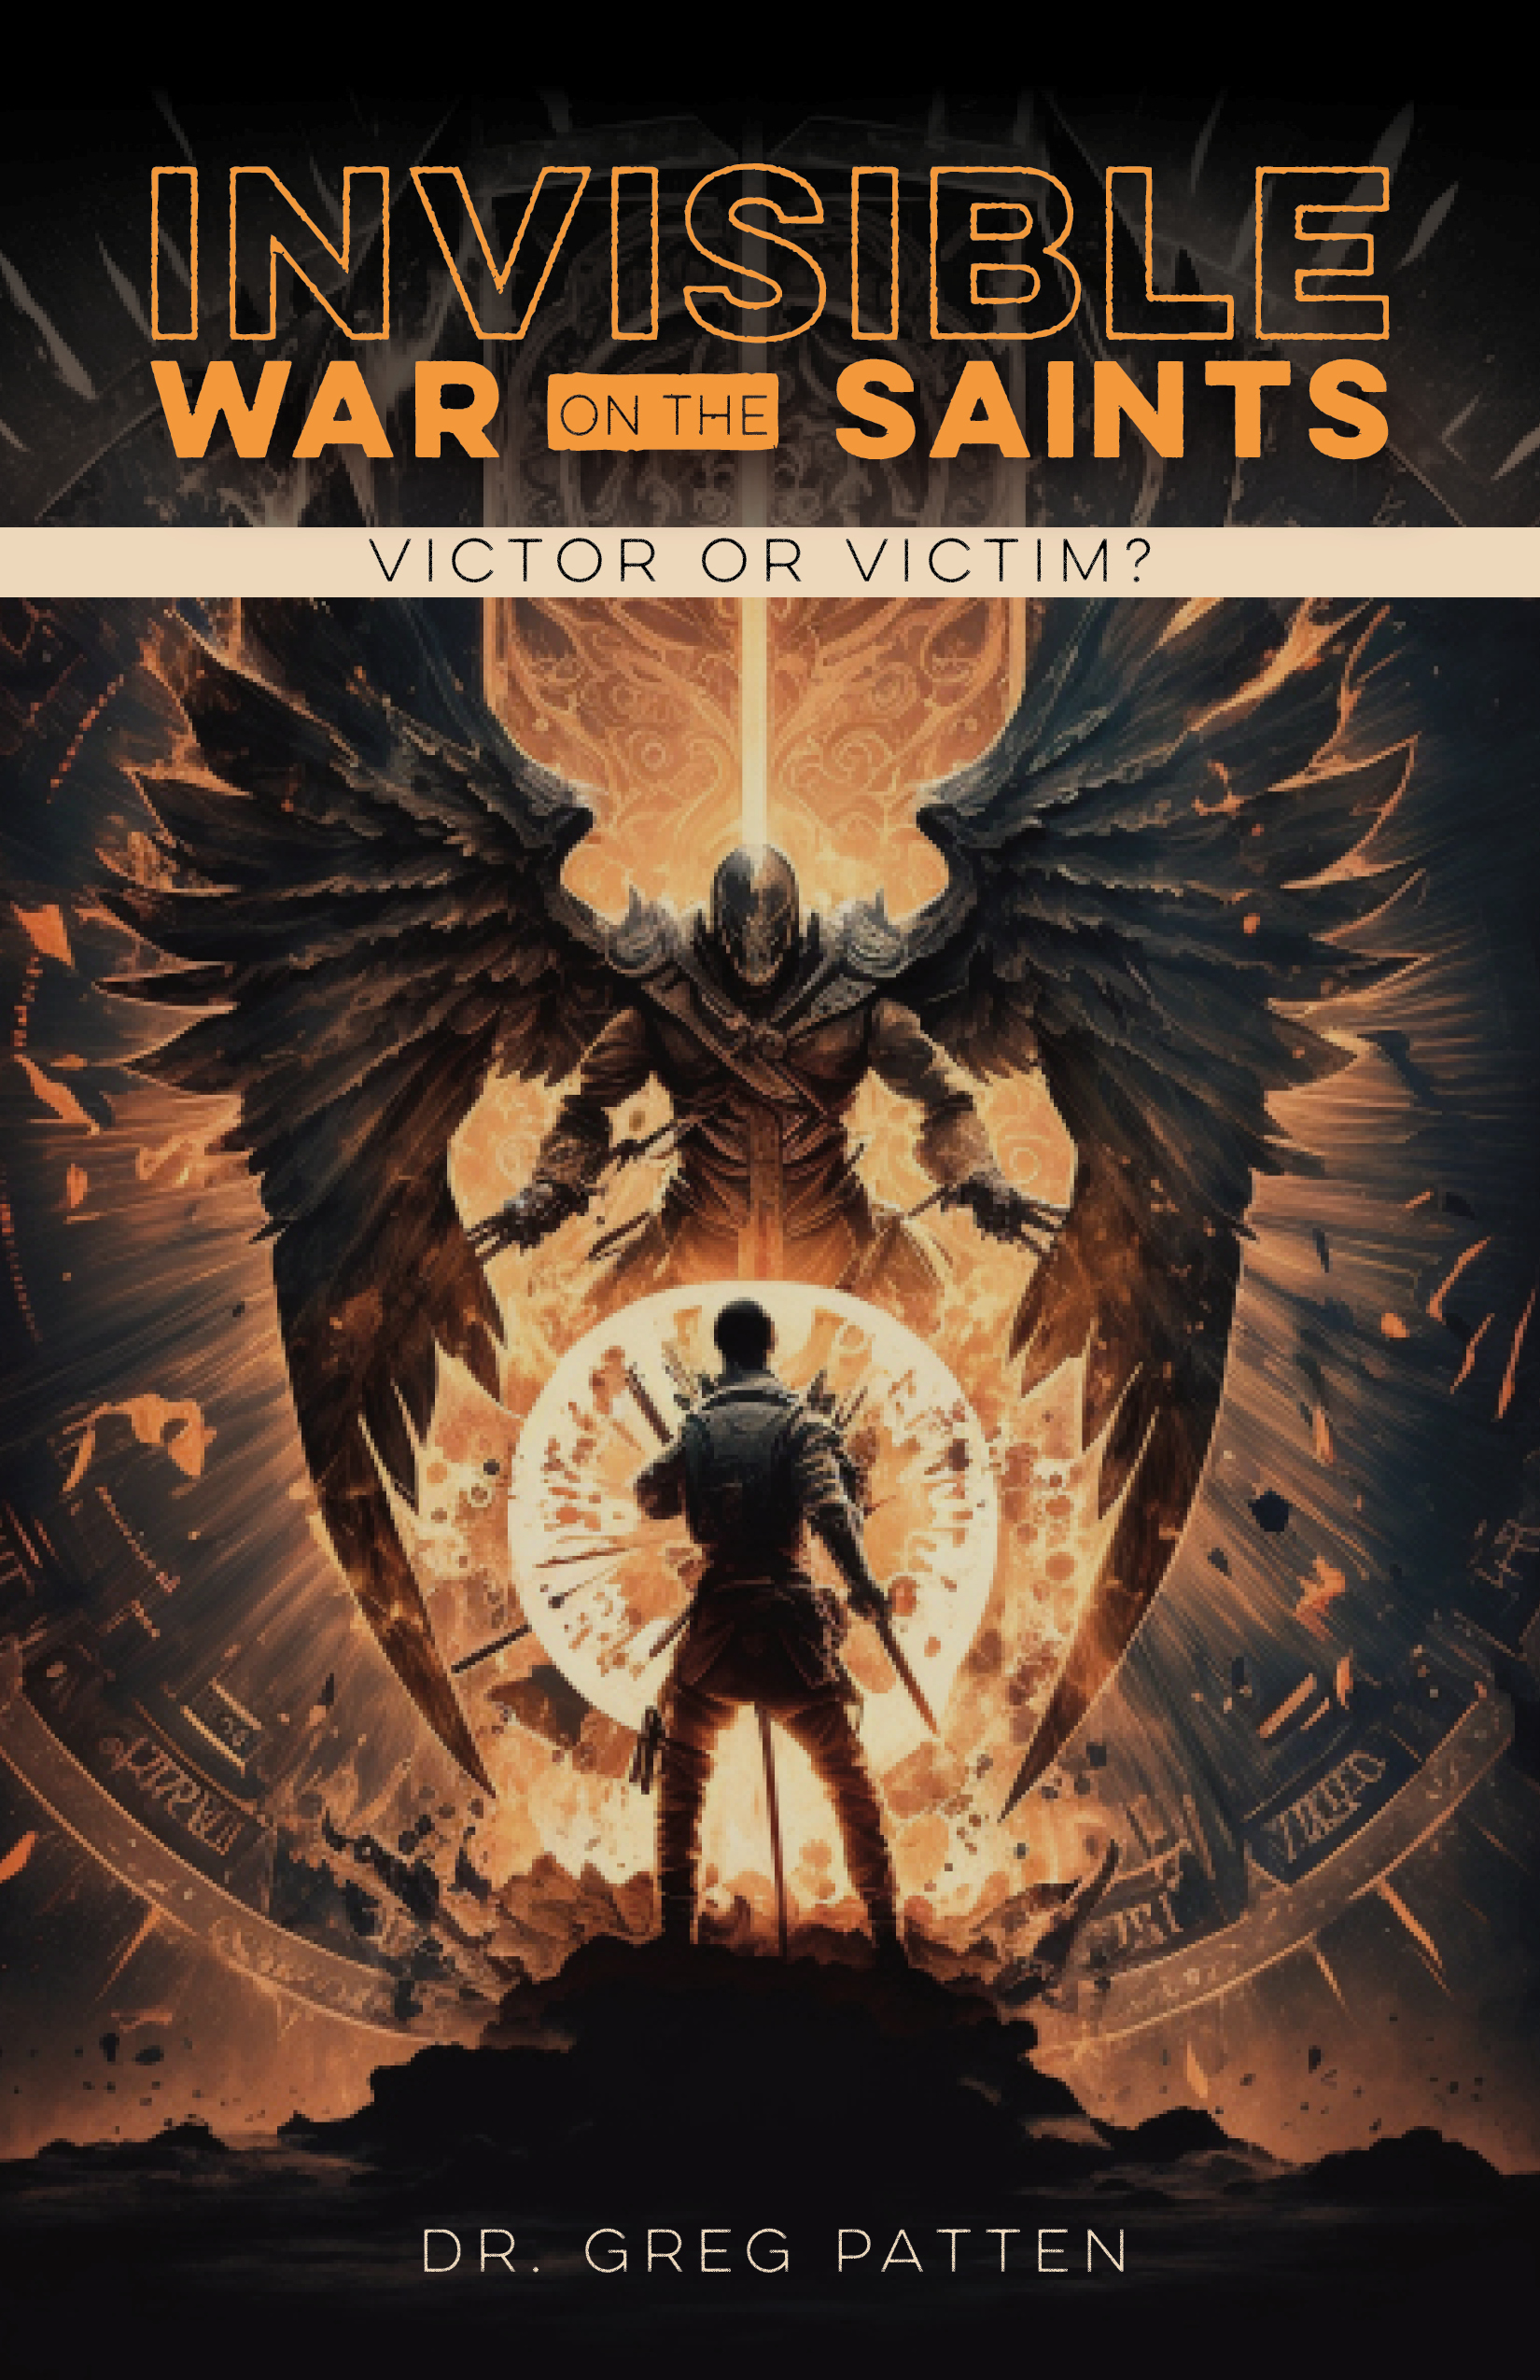 Invisible War on the Saints book by Greg Patten